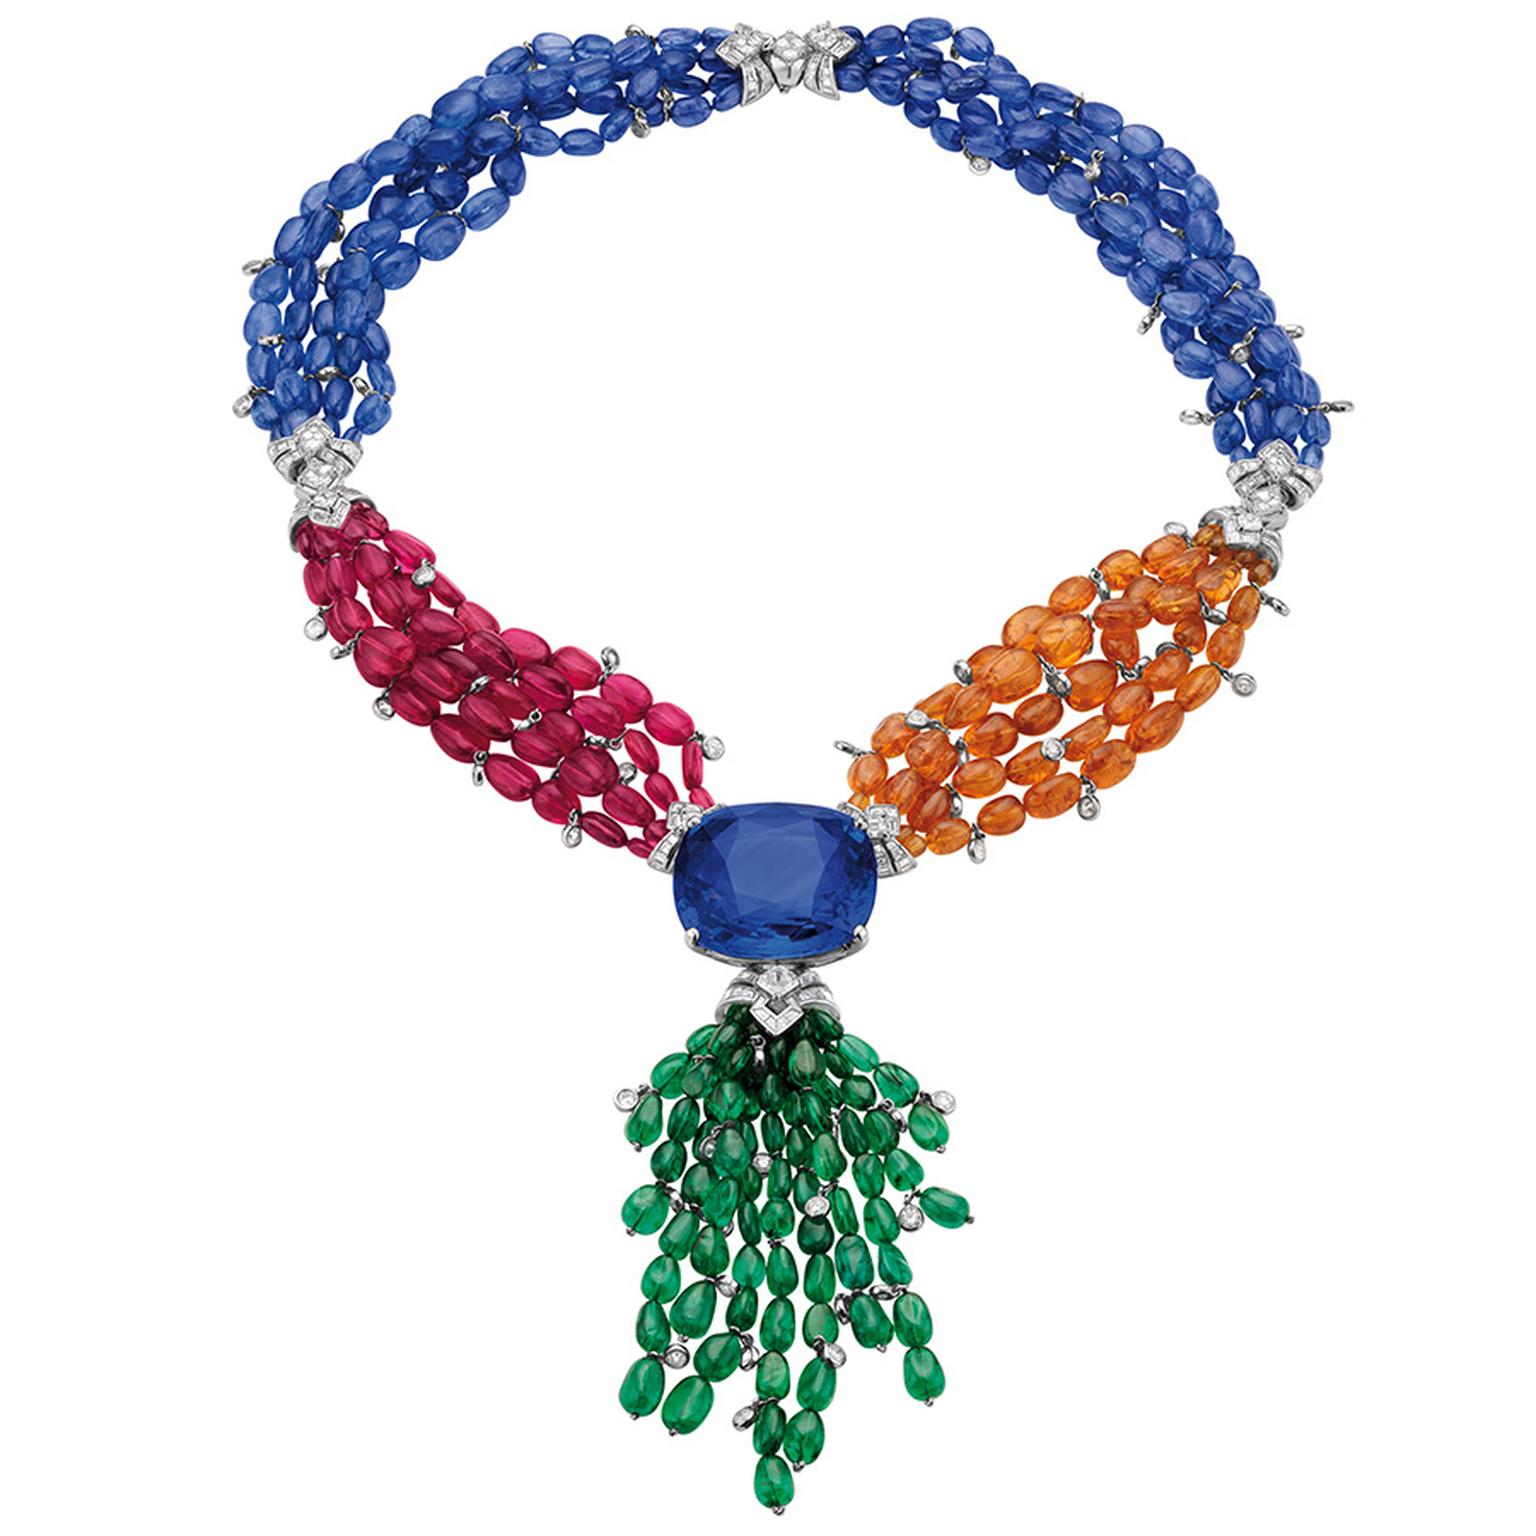 Inspired by Elizabeth Taylor's jewels, Bulgari created the Elizabeth Taylor necklace for the Biennale des Antiquaires 2012 featuring a 165ct central sapphire